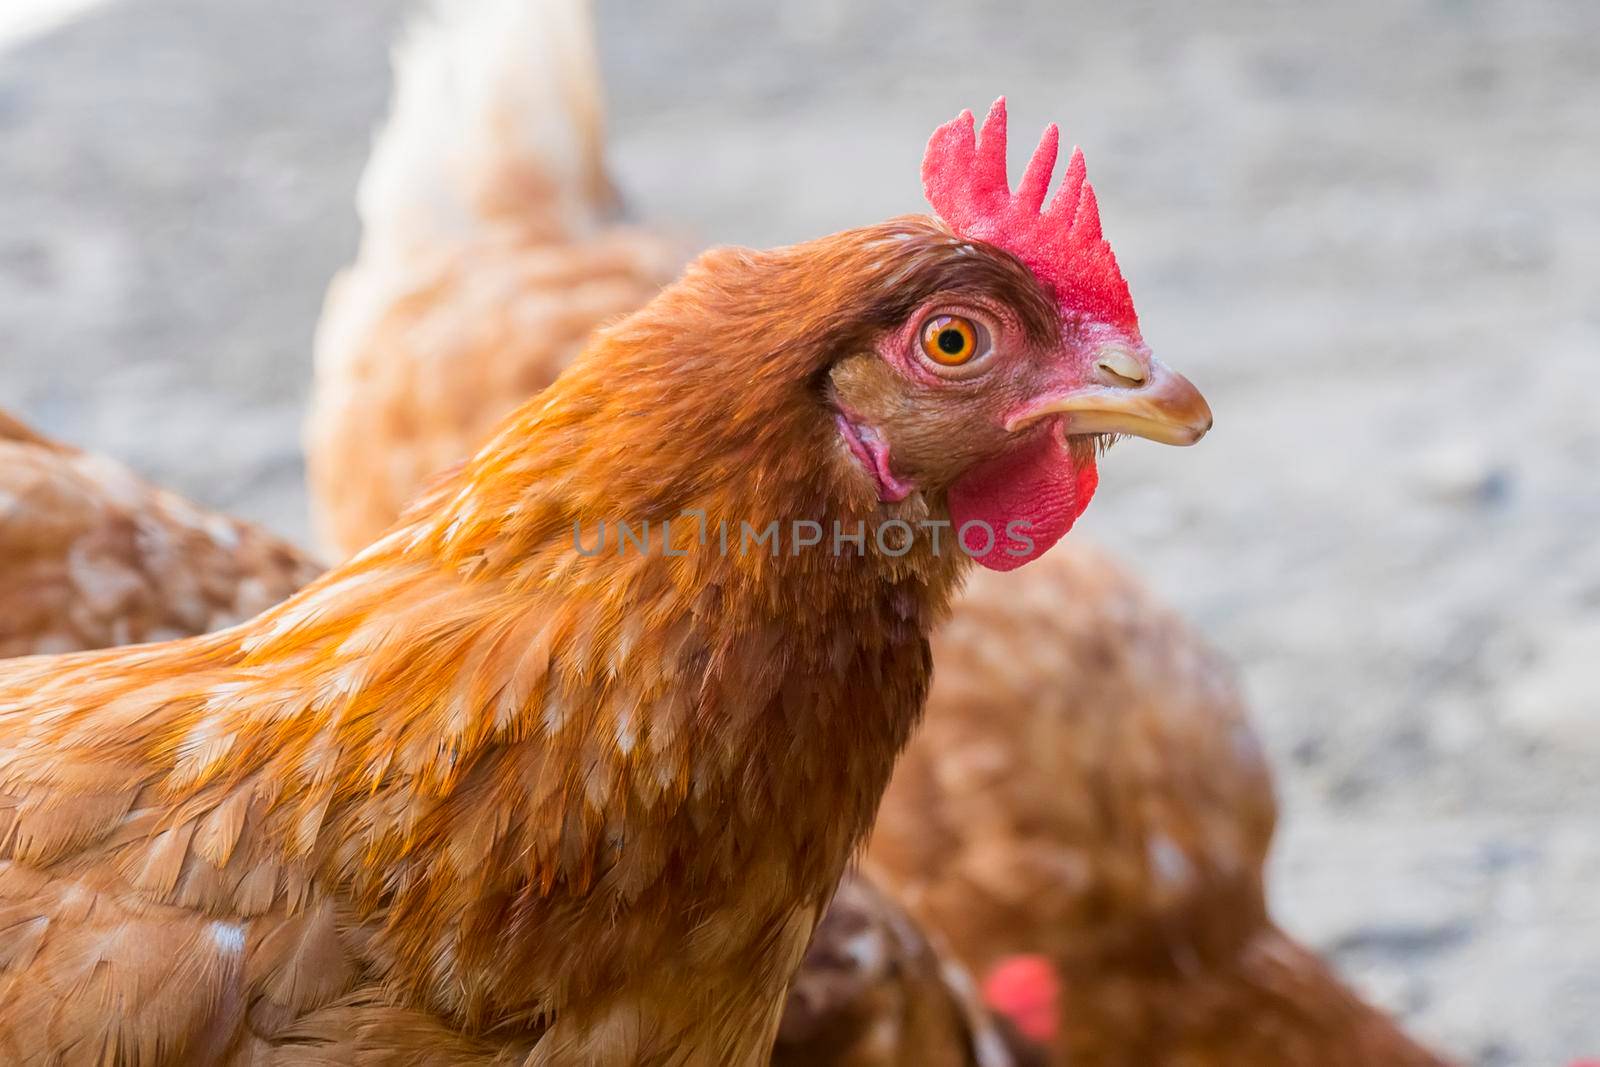 Hen staring because she is curious by max8xam